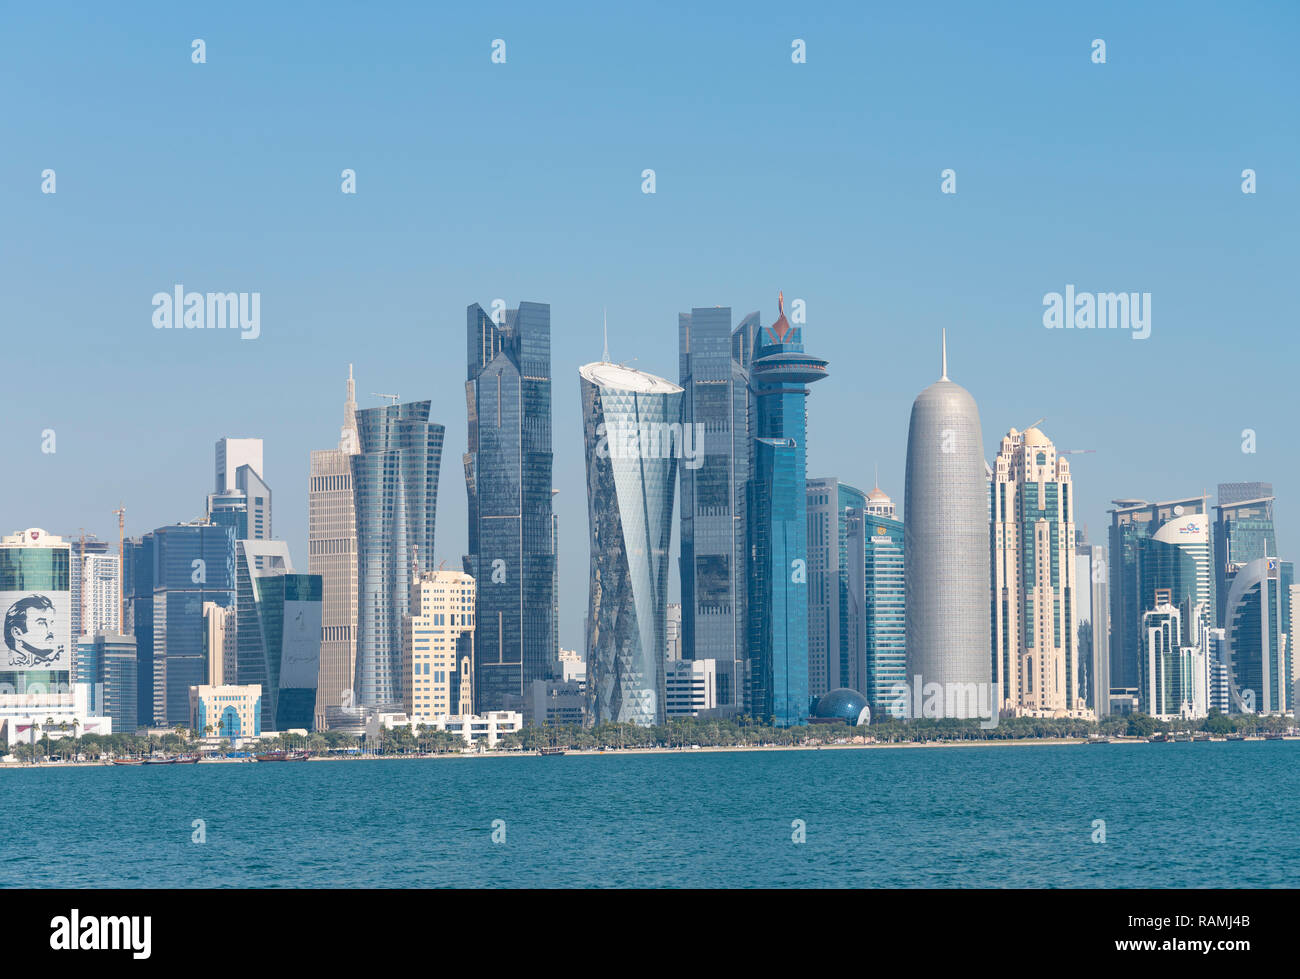 Daytime Skyline view of West Bay business district from The Corniche in Doha, Qatar Stock Photo